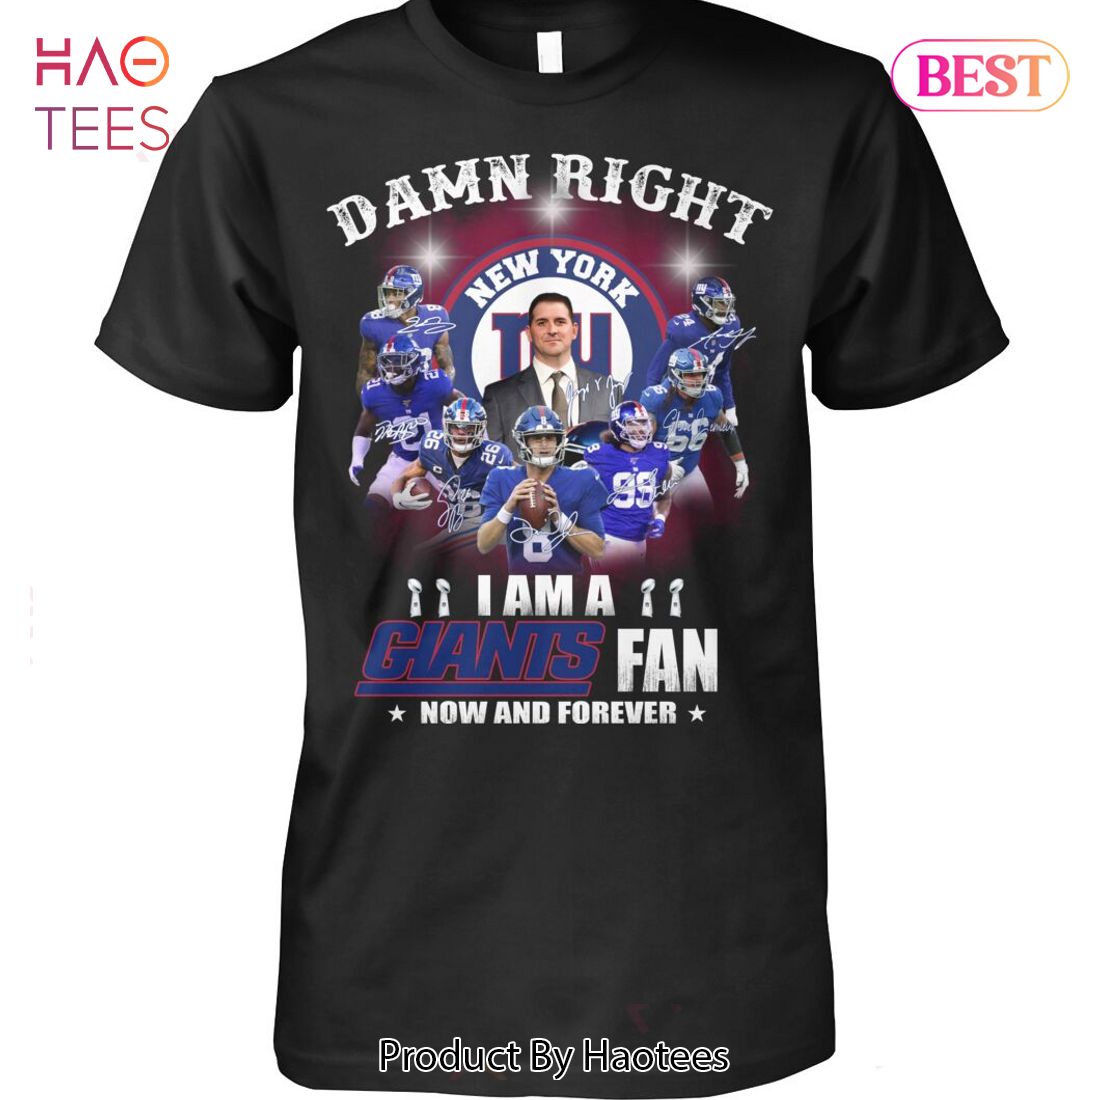 NEW Damn Right New York Giants Fan Now And Forever Unisex T-Shirt